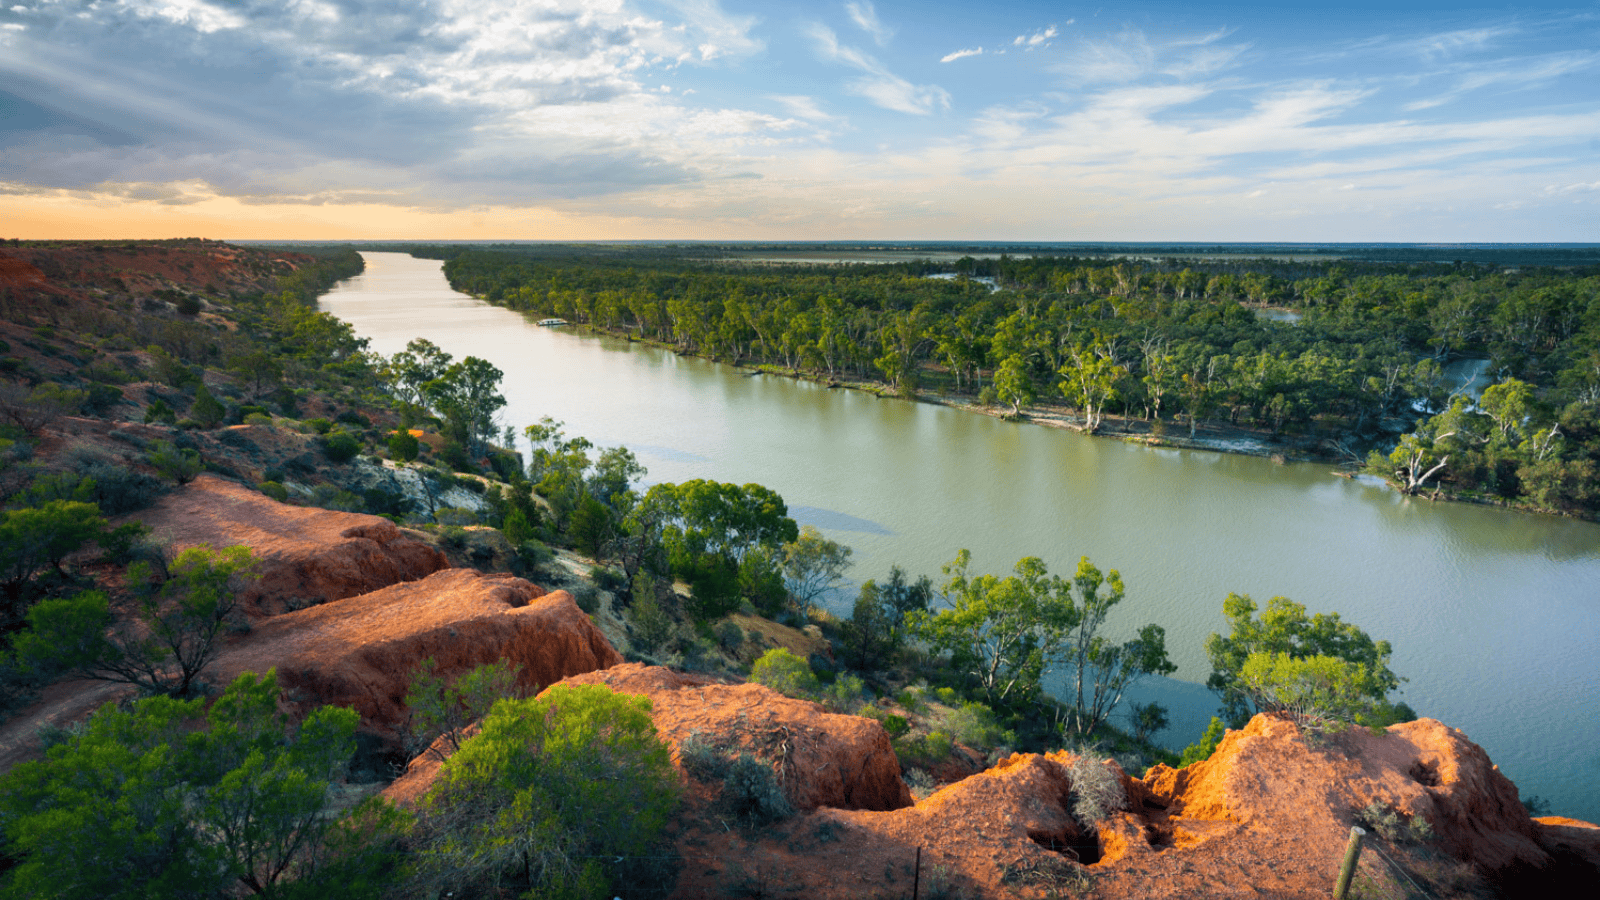 <p>Tap into your adventurous side on Murray River Paddlestreamers’ <a href="https://www.murrayriverpaddlesteamers.com.au/7-night-murray-river-cruise/" rel="nofollow external noopener noreferrer">All the Rivers Run</a> tour. Spend seven nights aboard a historic riverboat while admiring Australia’s rugged beauty. The Murray River flows through Southeast Australia and is a thriving habitat for native wildlife like kangaroos and wallabies.</p><p>Passengers aboard the PS Emmylou will experience various art, history, food, and nature tours. The ship has a distinct blend of Old World charm and modern convenience. Its exclusive amenities, like a restaurant, bar, and premier cabins, guarantee an unforgettable stay.</p>